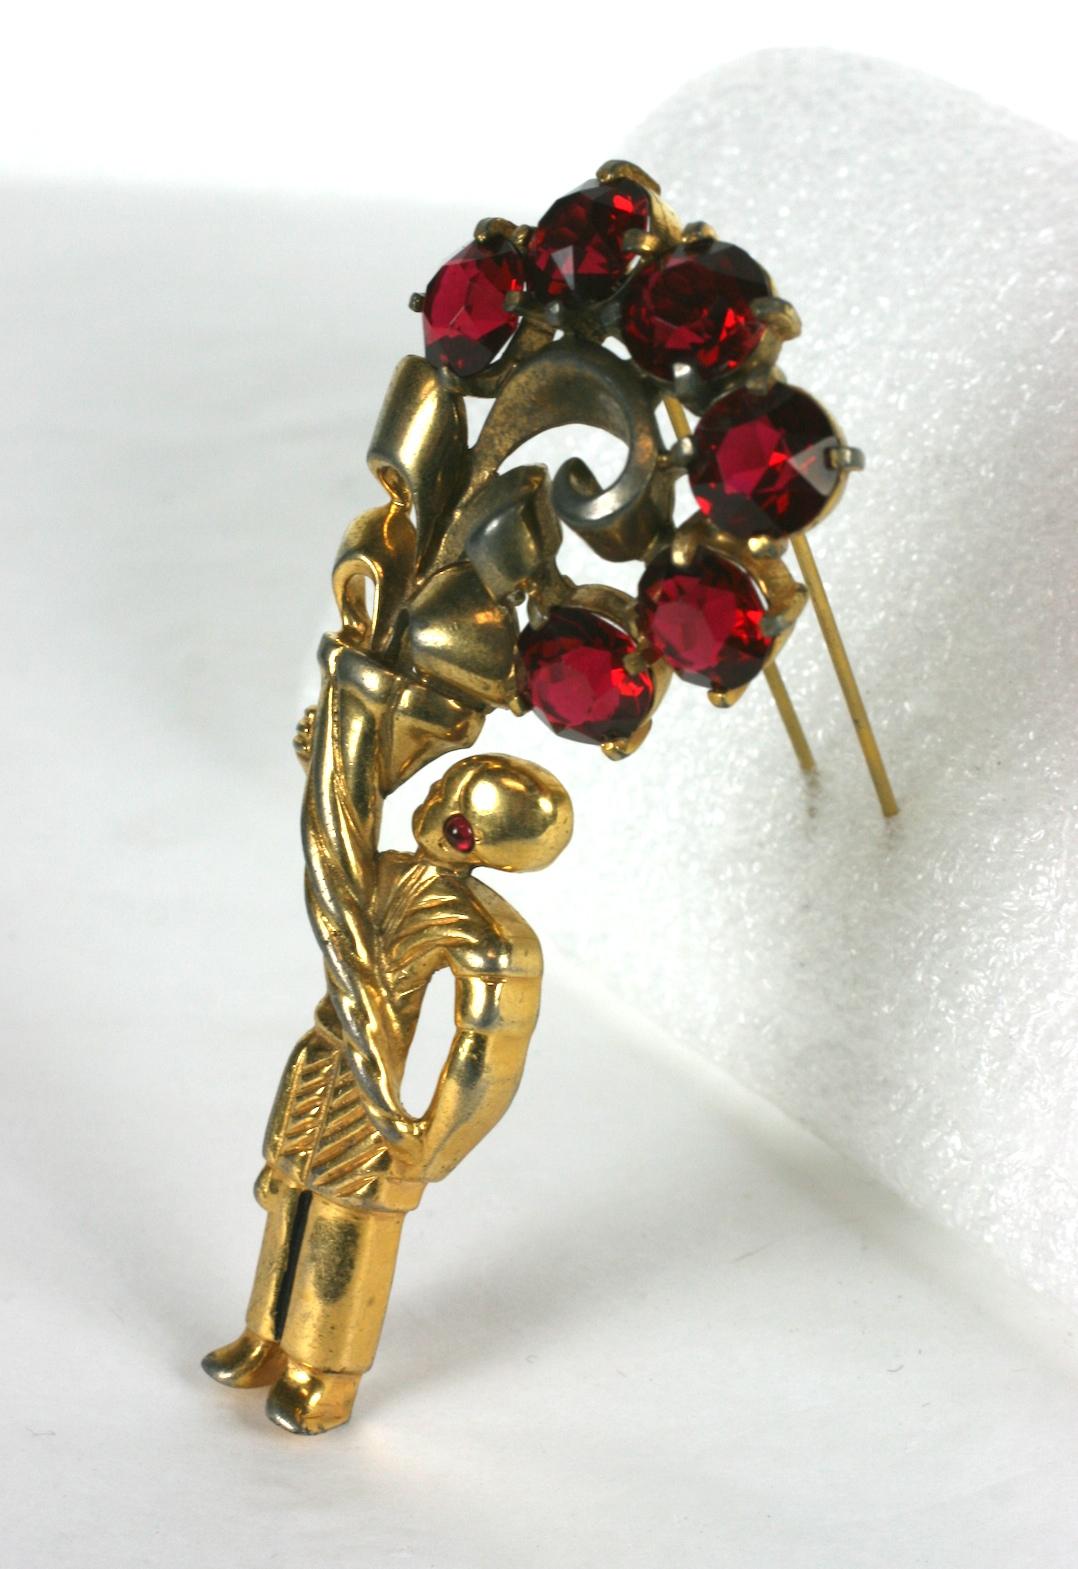 Eisenberg Original gold plate base metal fur clip. The egyptian page figure with focal ruby crystal rhinestone earring, holding an over sized cornucopia with large round faceted ruby crystal branch  flowers and curling leaves. c. 1940.
  Excellent